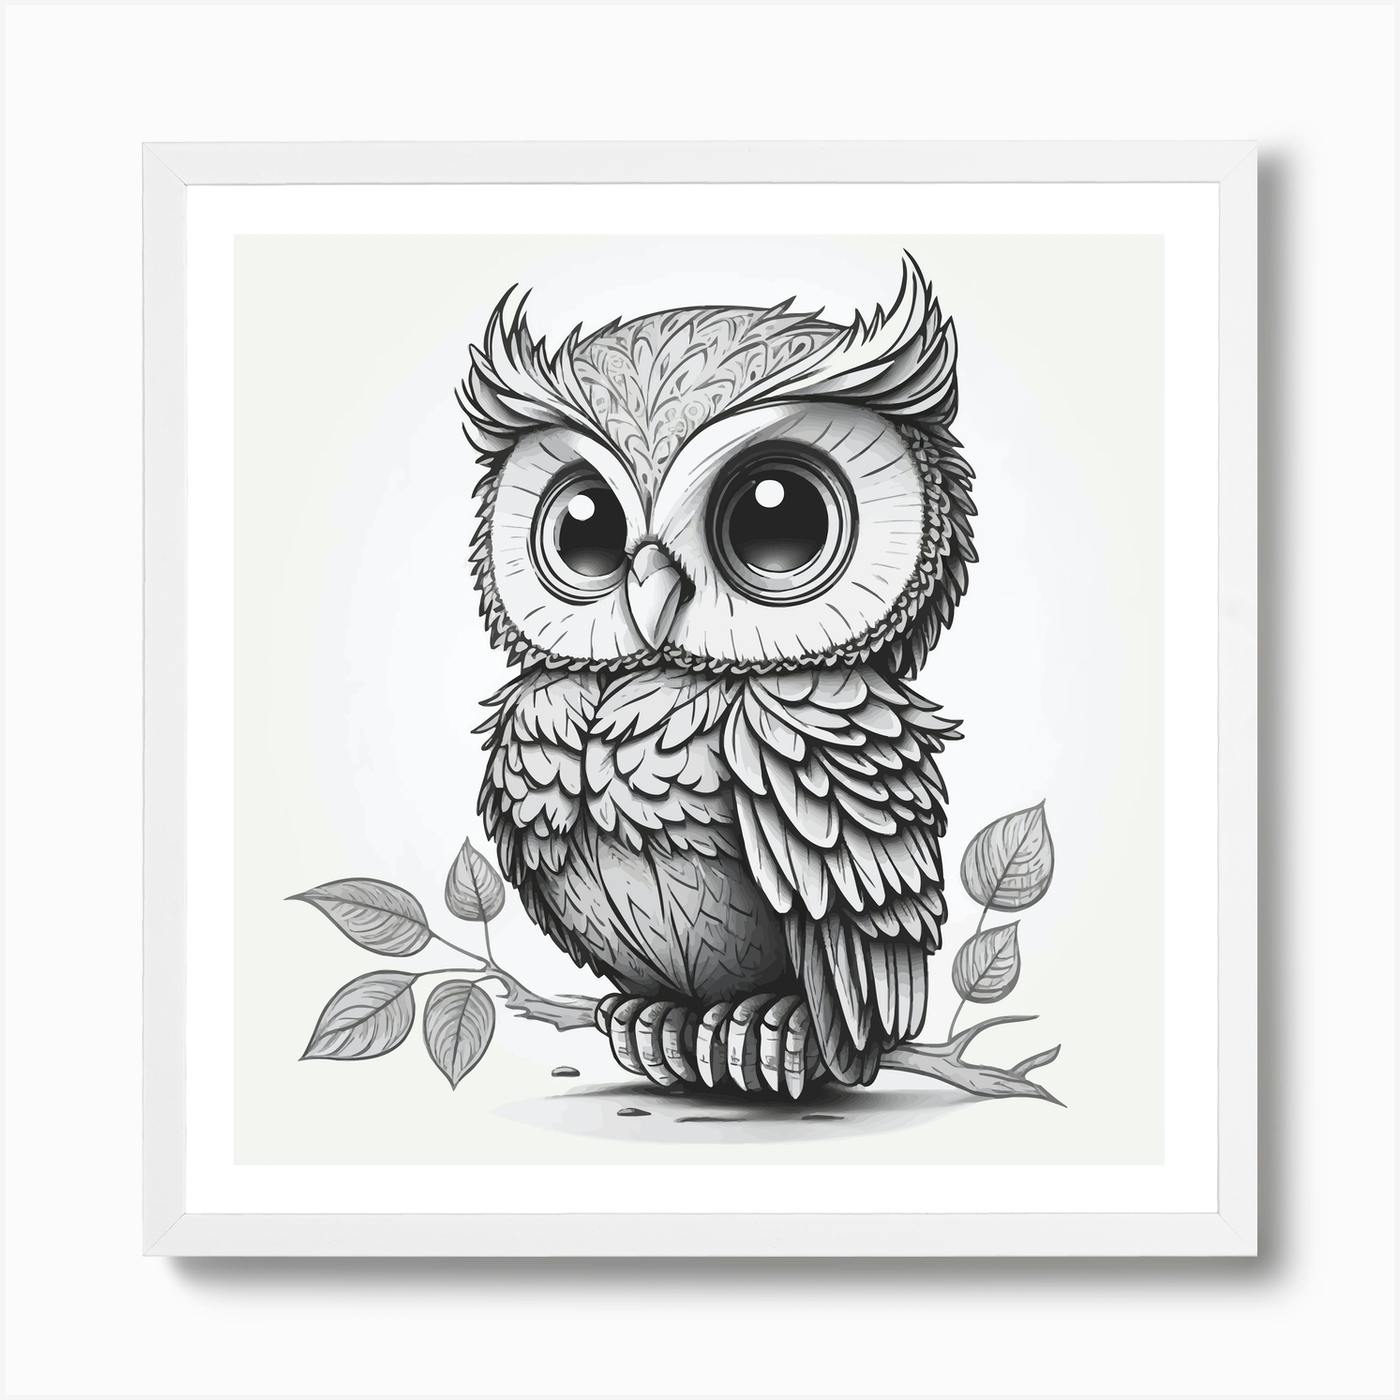 How to Draw owl. Step by step easy owl drawing #drawowl #drawing |  Strigiformes, drawing, video recording | Learn owl drawing easily. 𝗟𝗶𝗸𝗲  and 𝘀𝗵𝗮𝗿𝗲 our page and video to support us.Watch